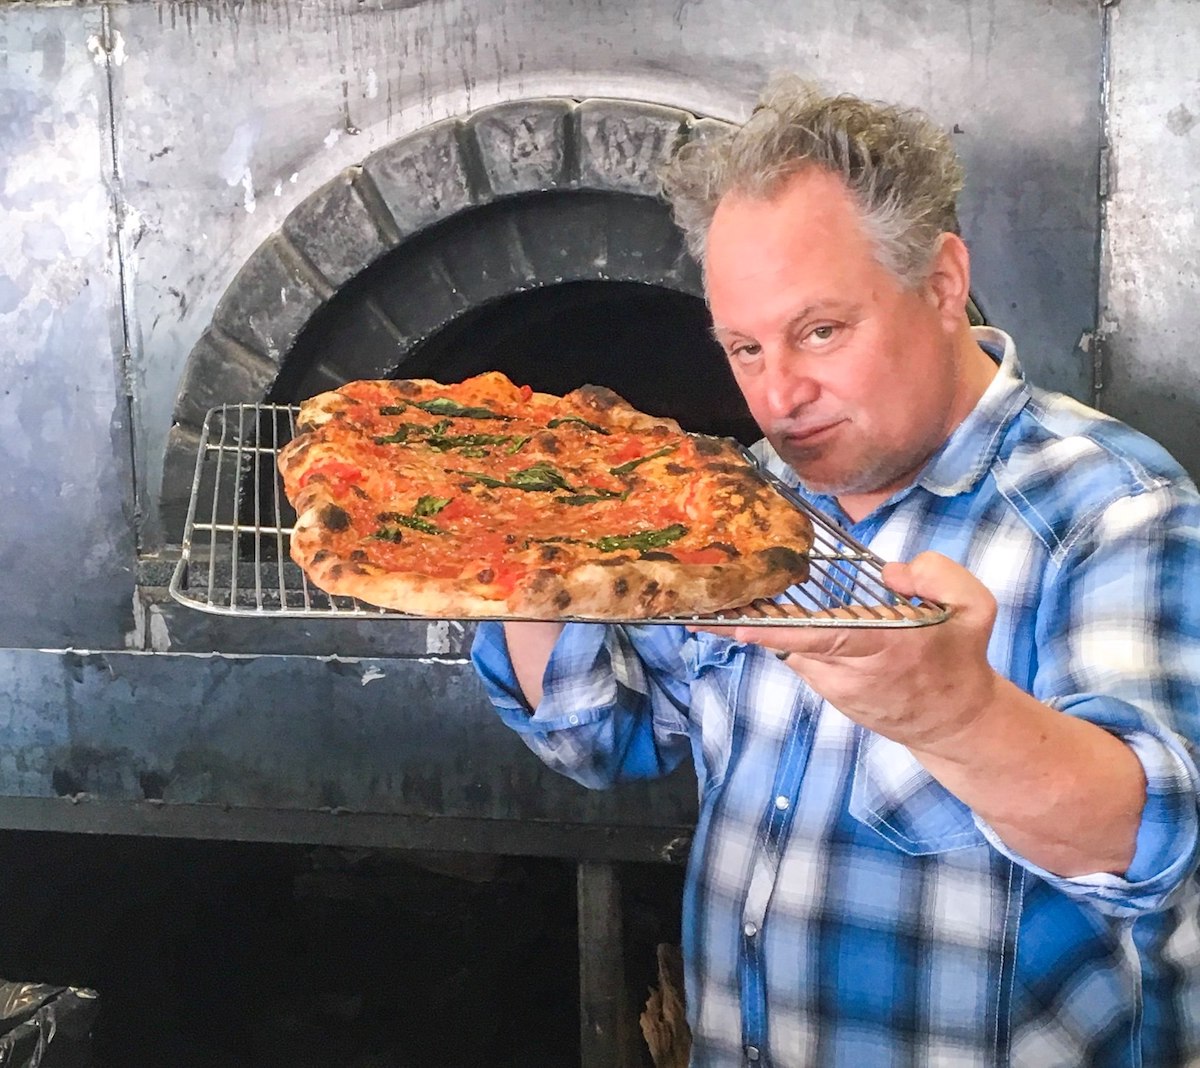 Chris Bianco holds a baked pizza on a screen close to his face and peers one it at the camera.